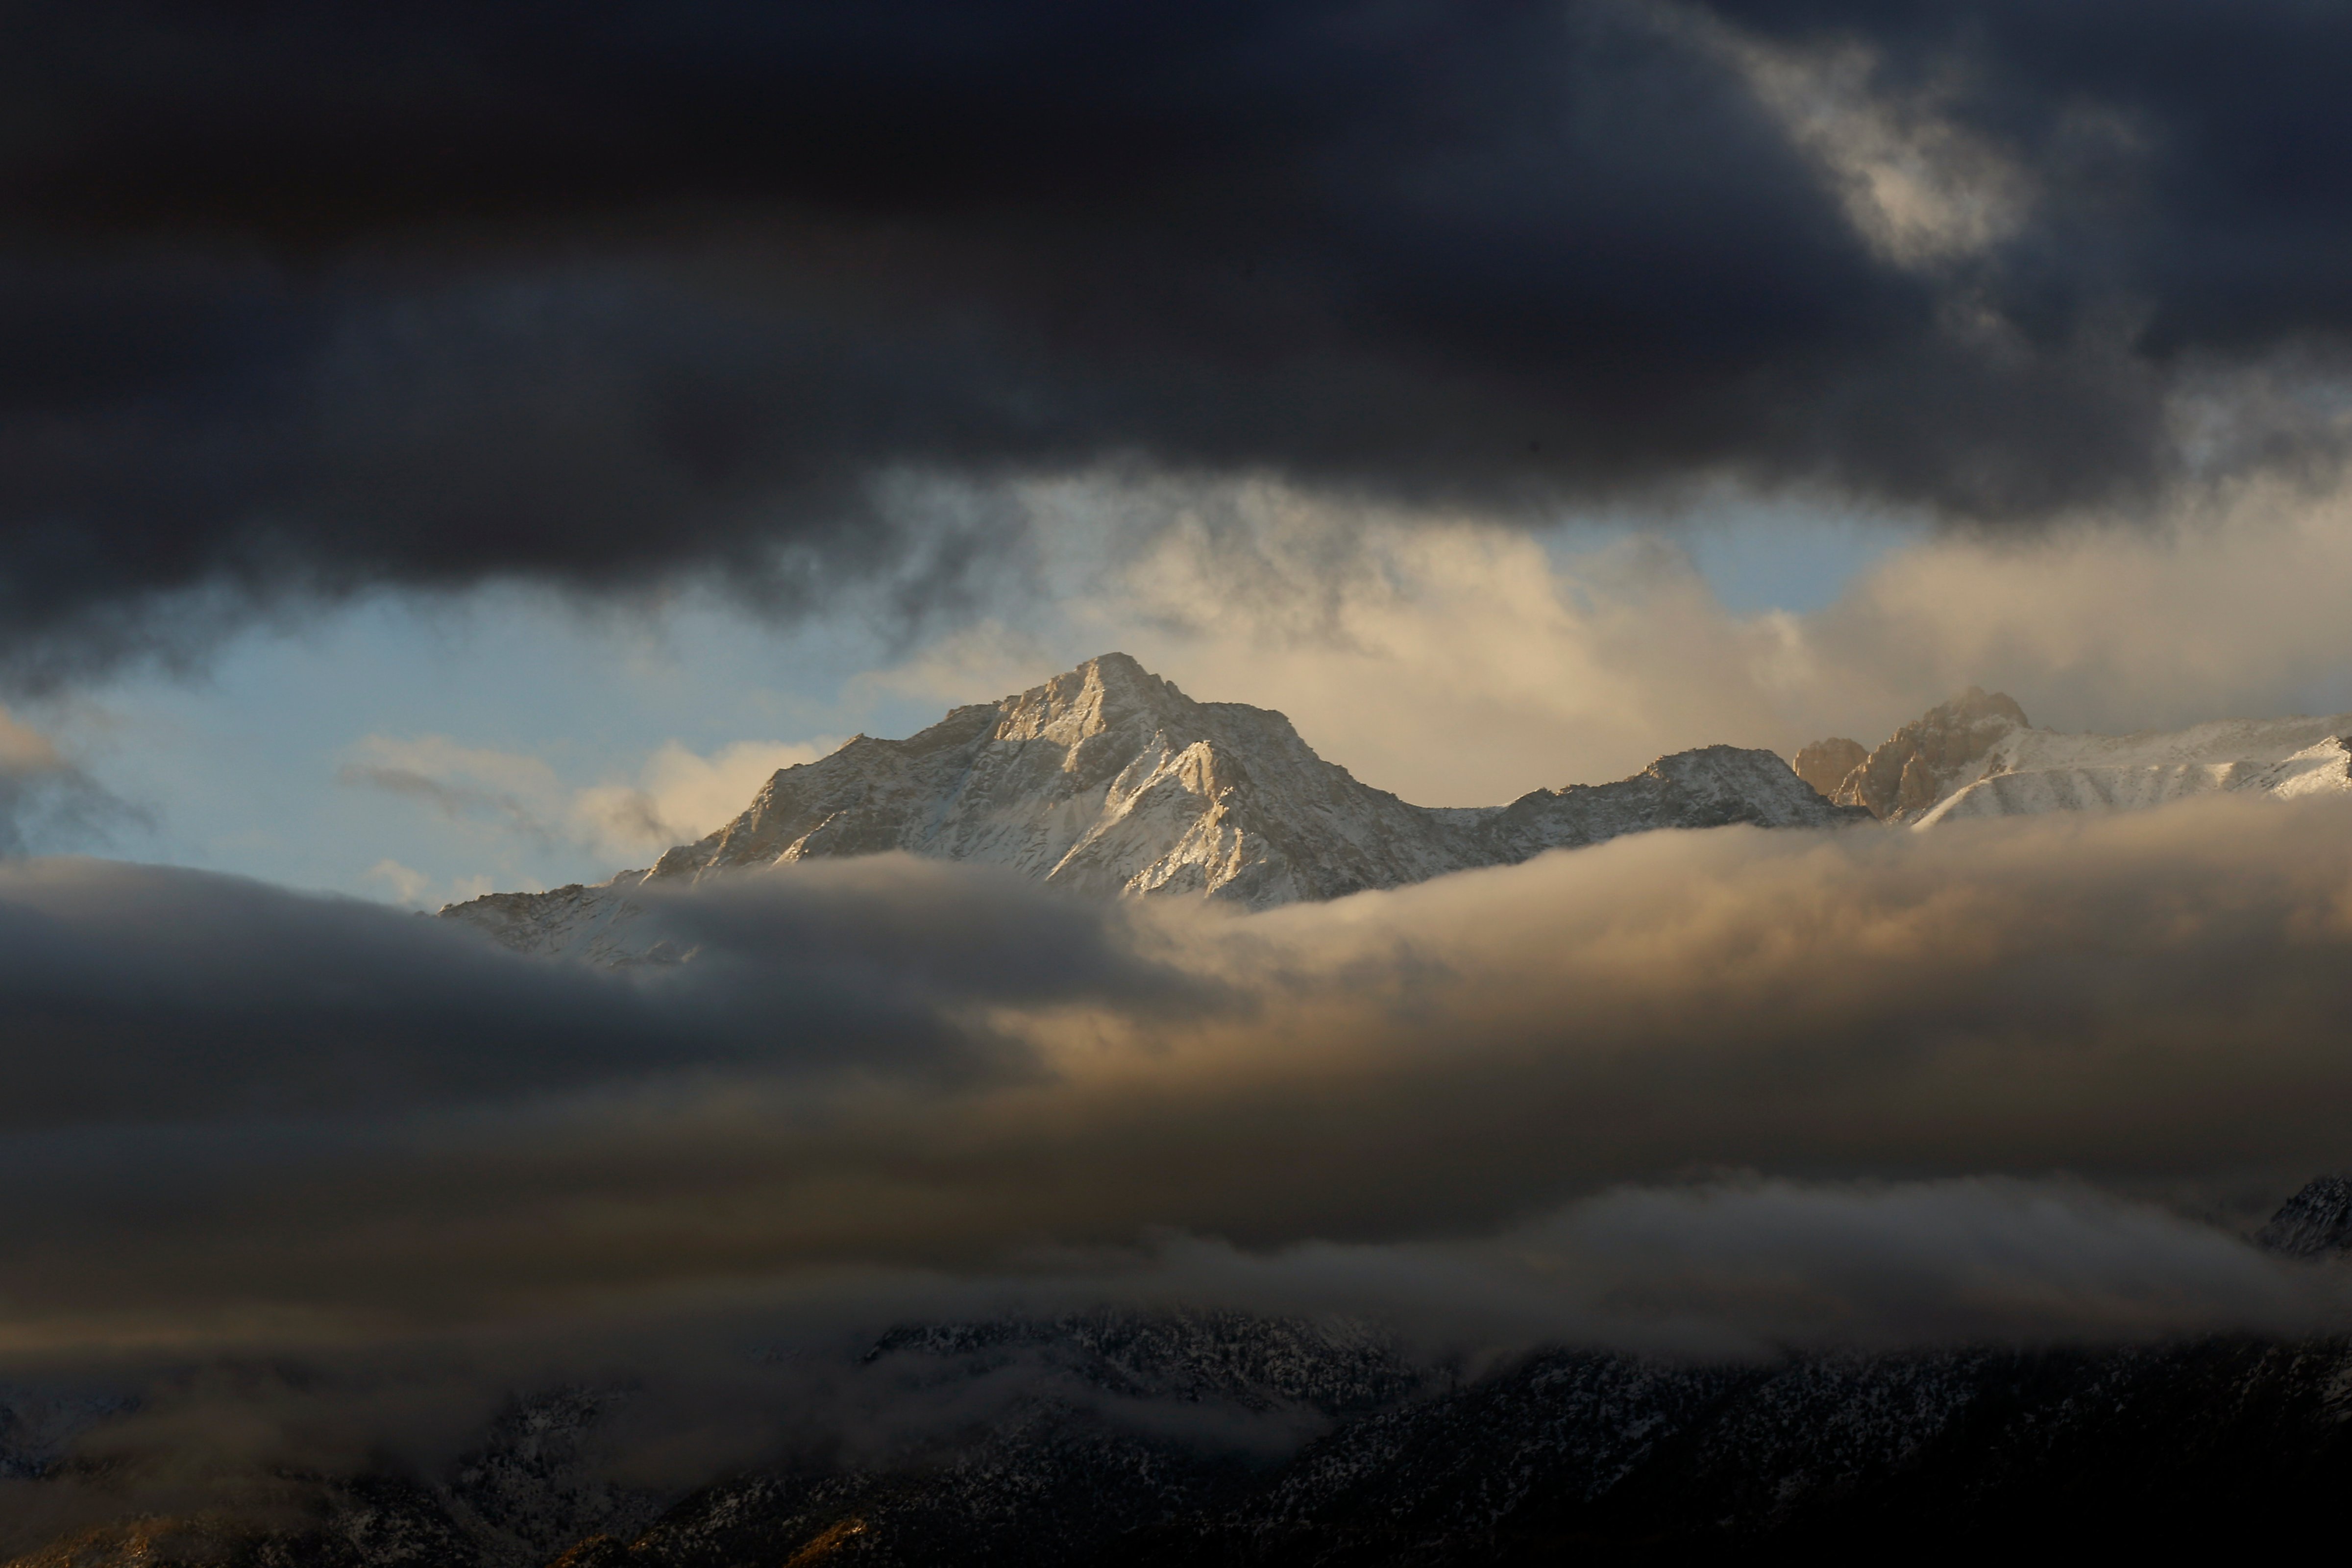 Snow is visible through the clouds on the Eastern Sierra from Lone Pine, Calif. overnight Nov. 21, 2016. (Francine Orr—LA Times via Getty Images)